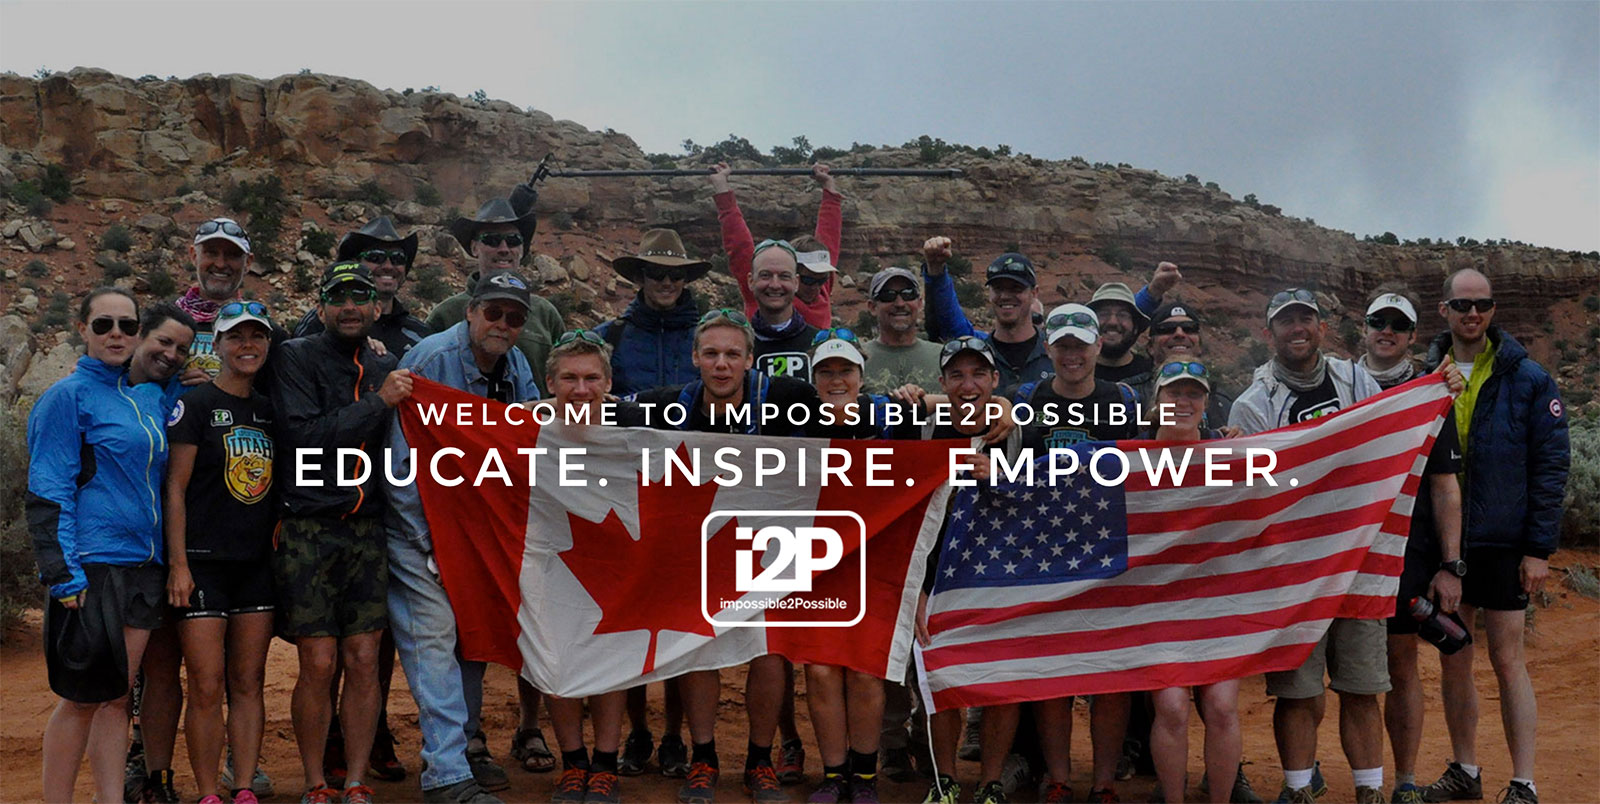 (c) Impossible2possible.com